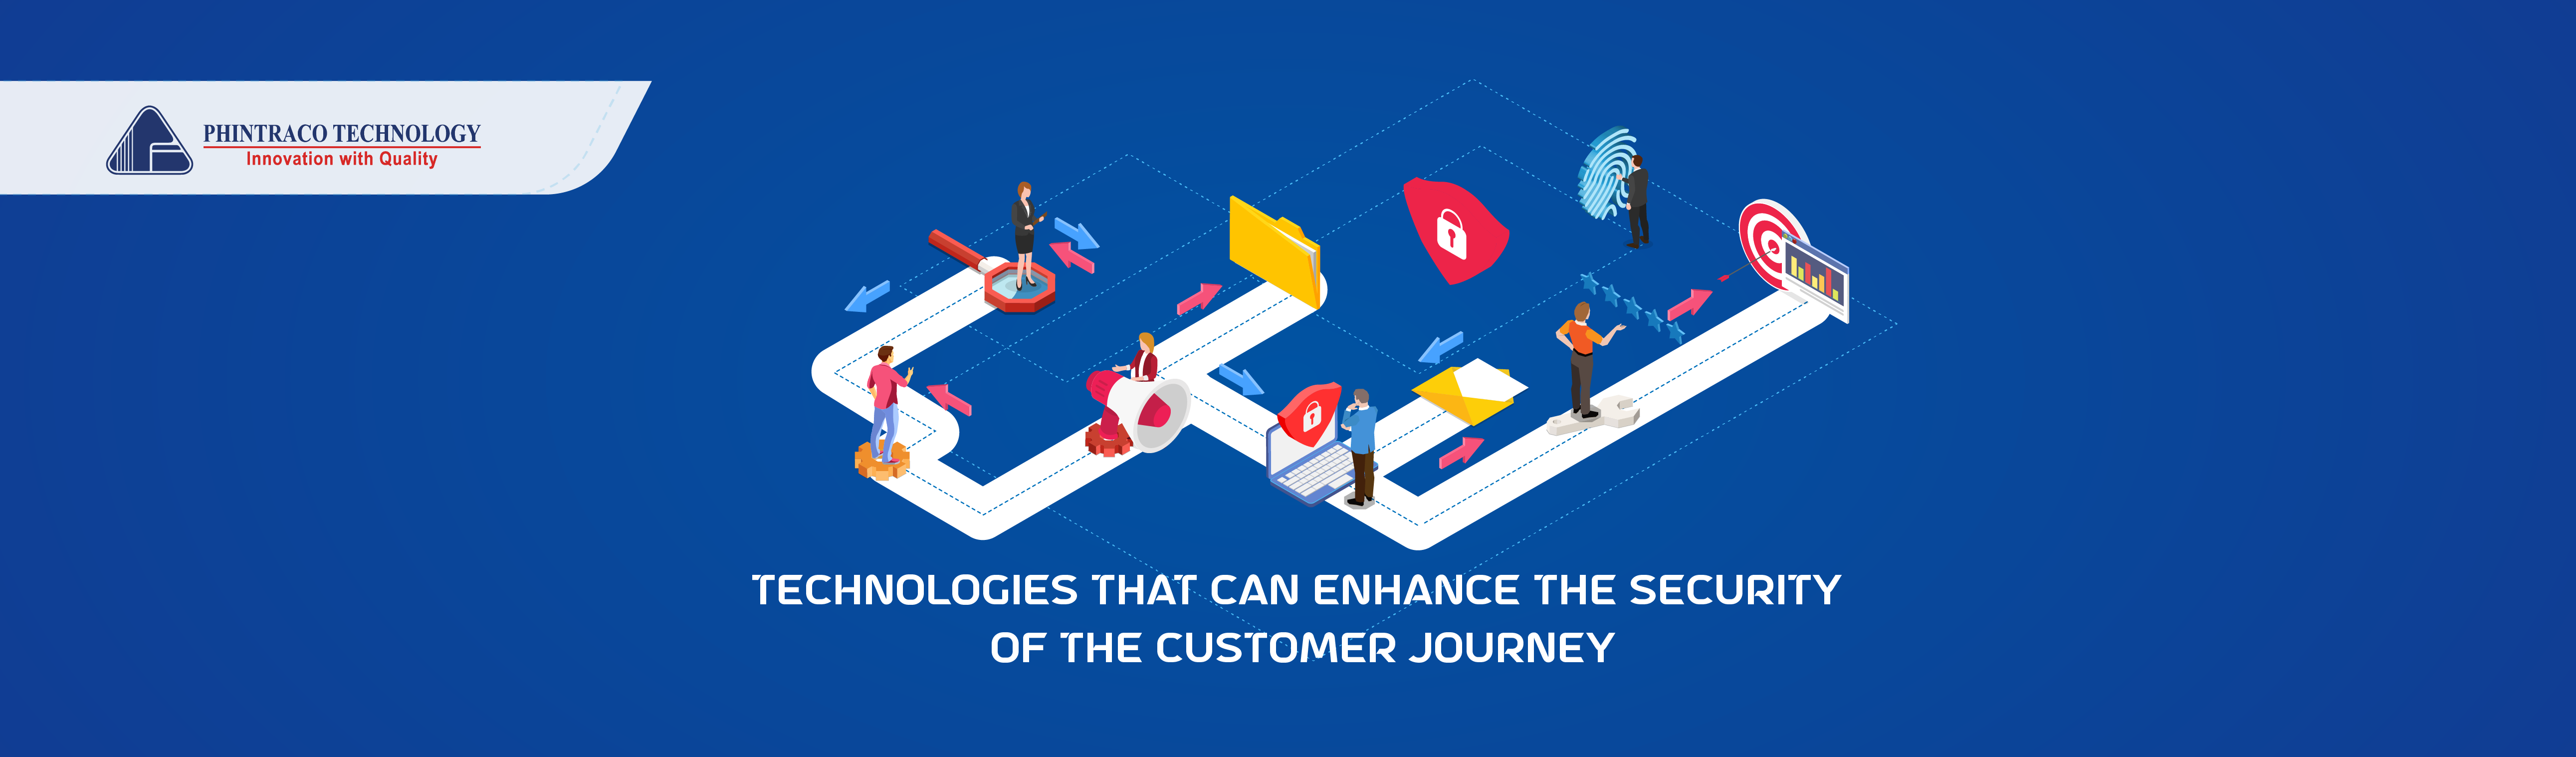 Improve Customer Journey Security using Technology